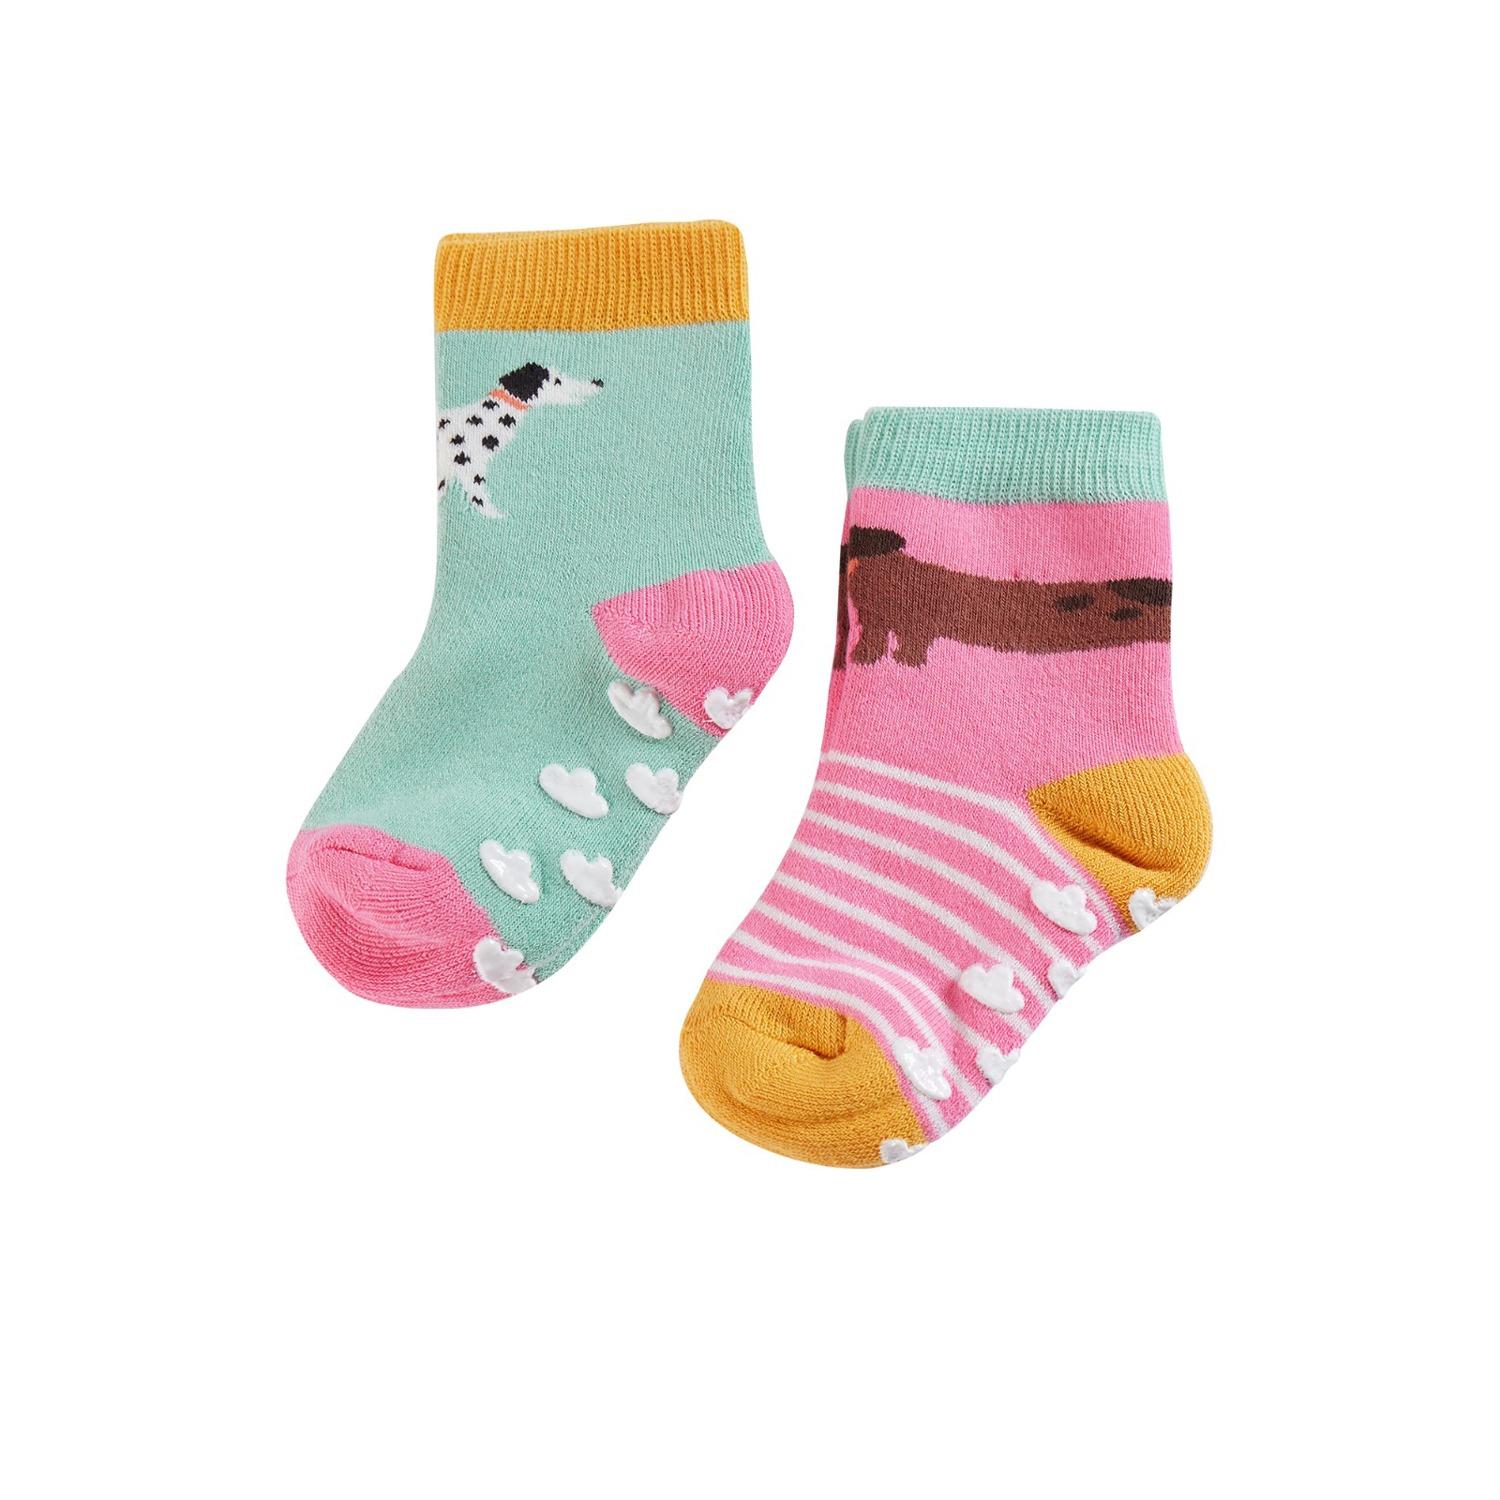 grippy socks dogs 2 pack by frugi SS23